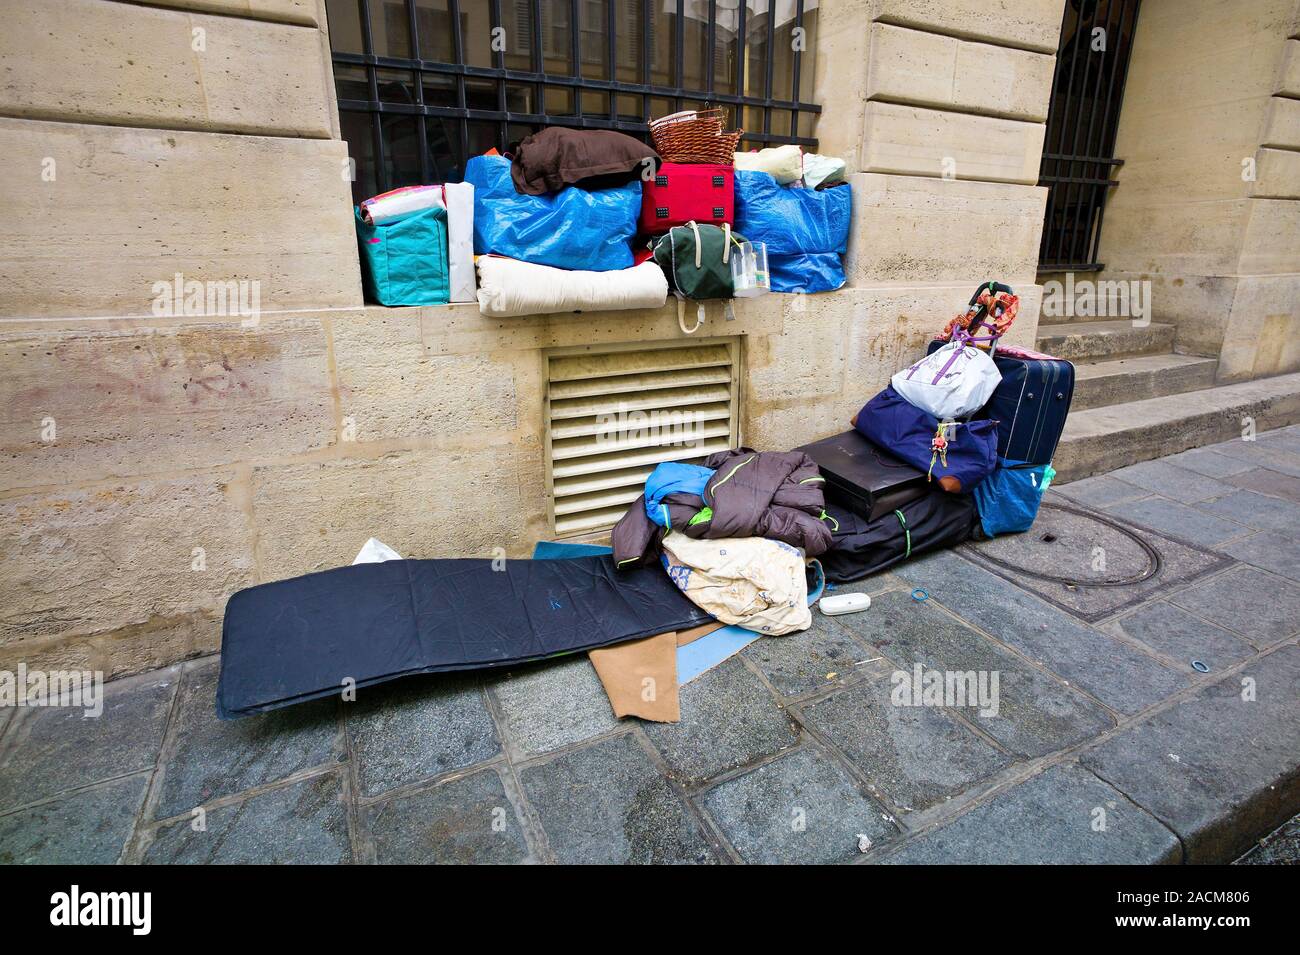 Paris, France. homeless person's place to sleep Stock Photo